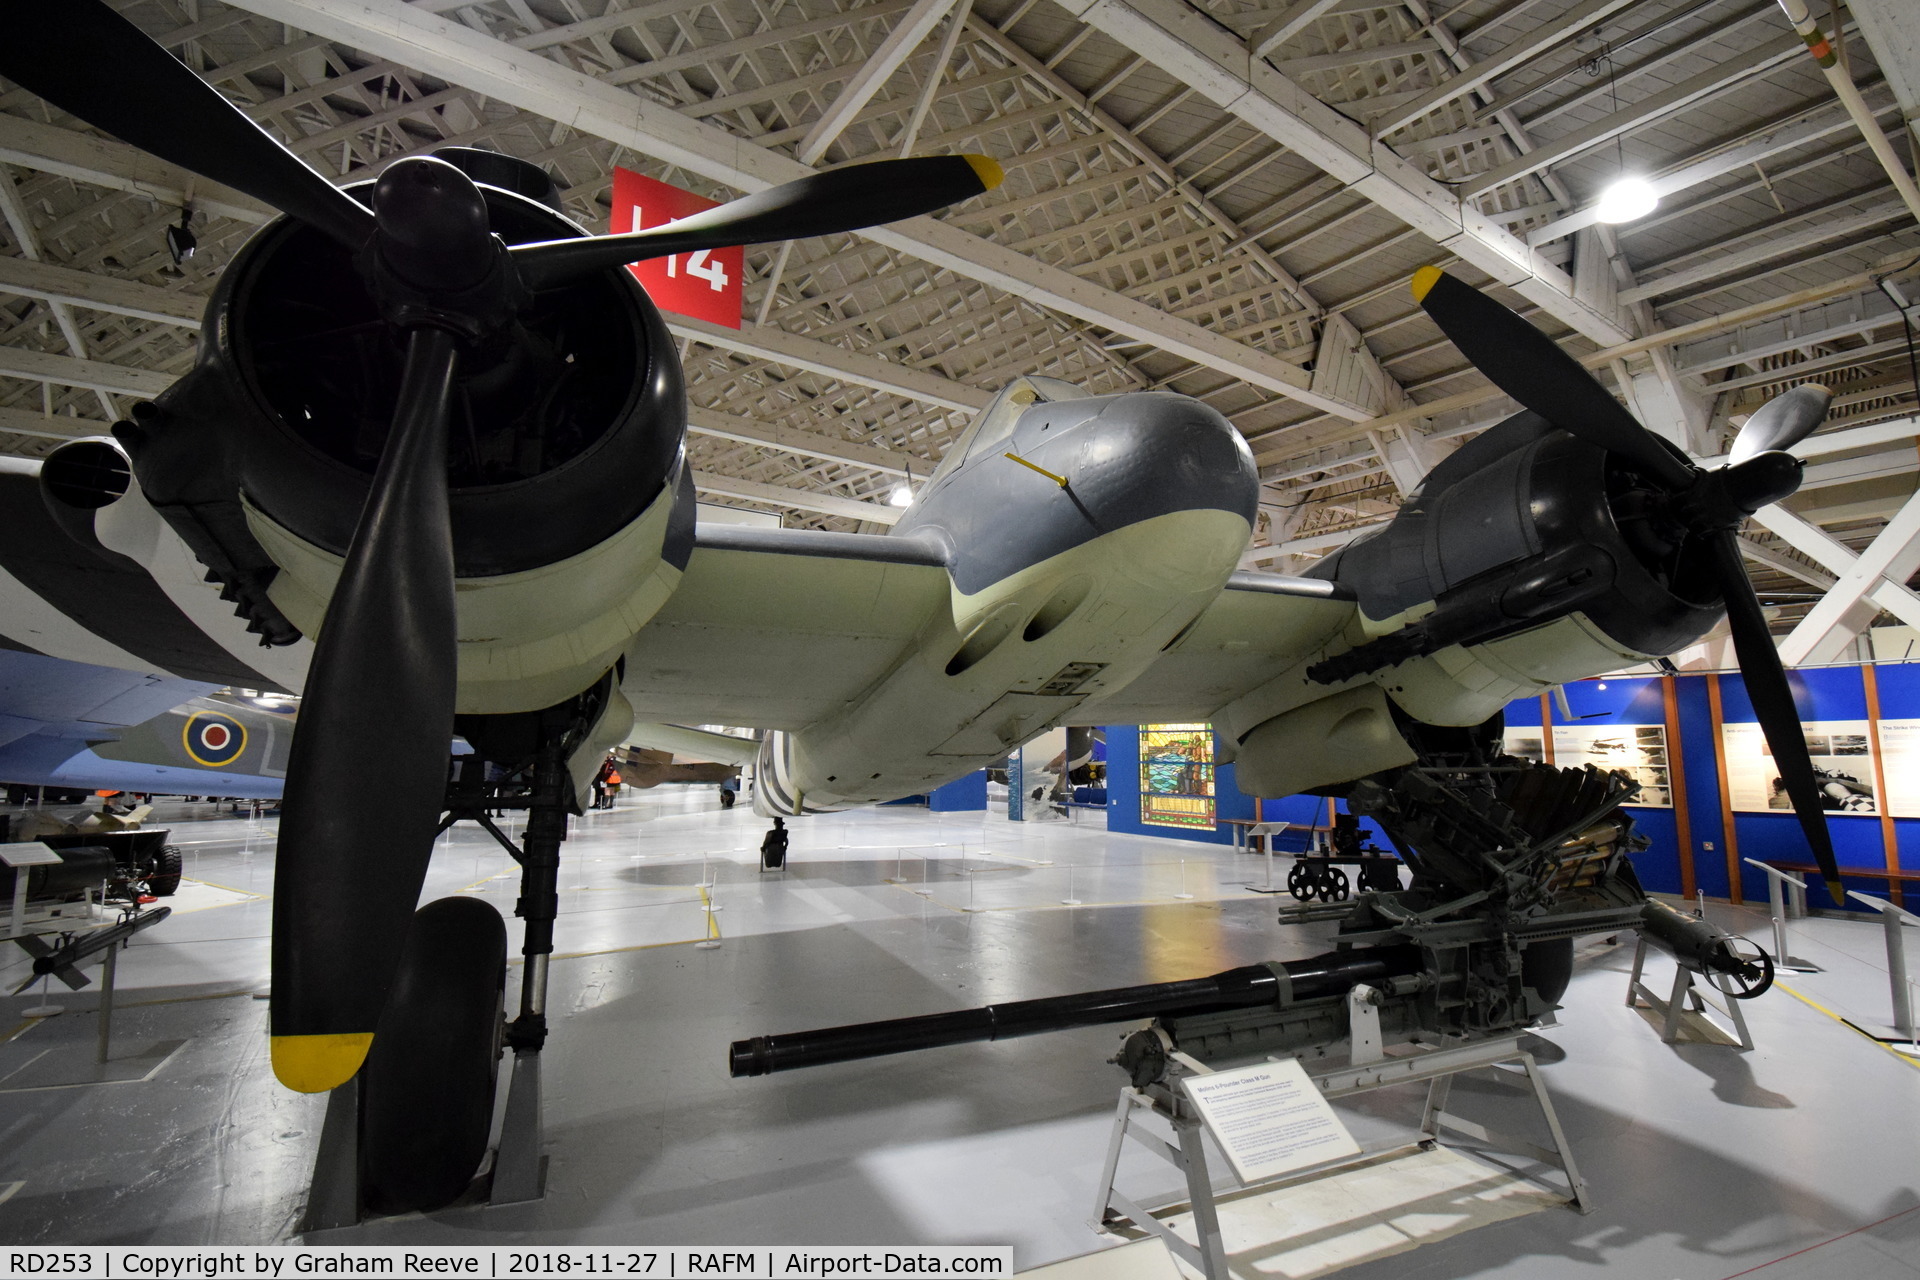 RD253, Bristol Beaufighter TF.X C/N Not found RD253, On display at the RAF Museum, Hendon.